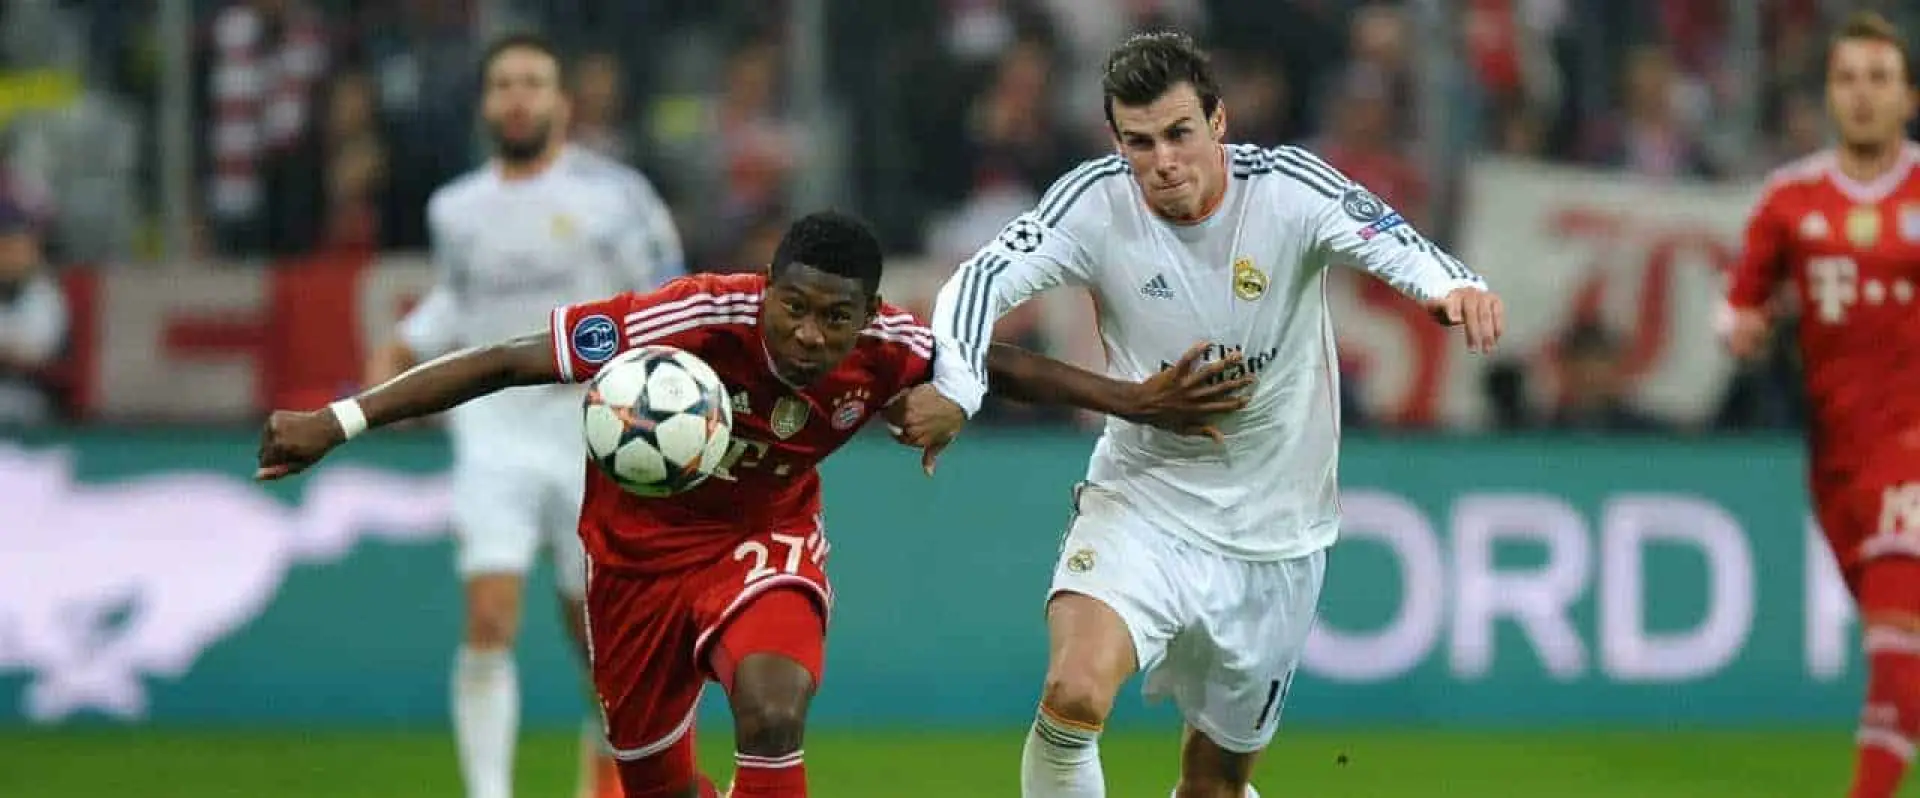 Coral look at Wales World Cup qualifying odds and the Alaba v Bale battle set to take place in Austria on October 6th.